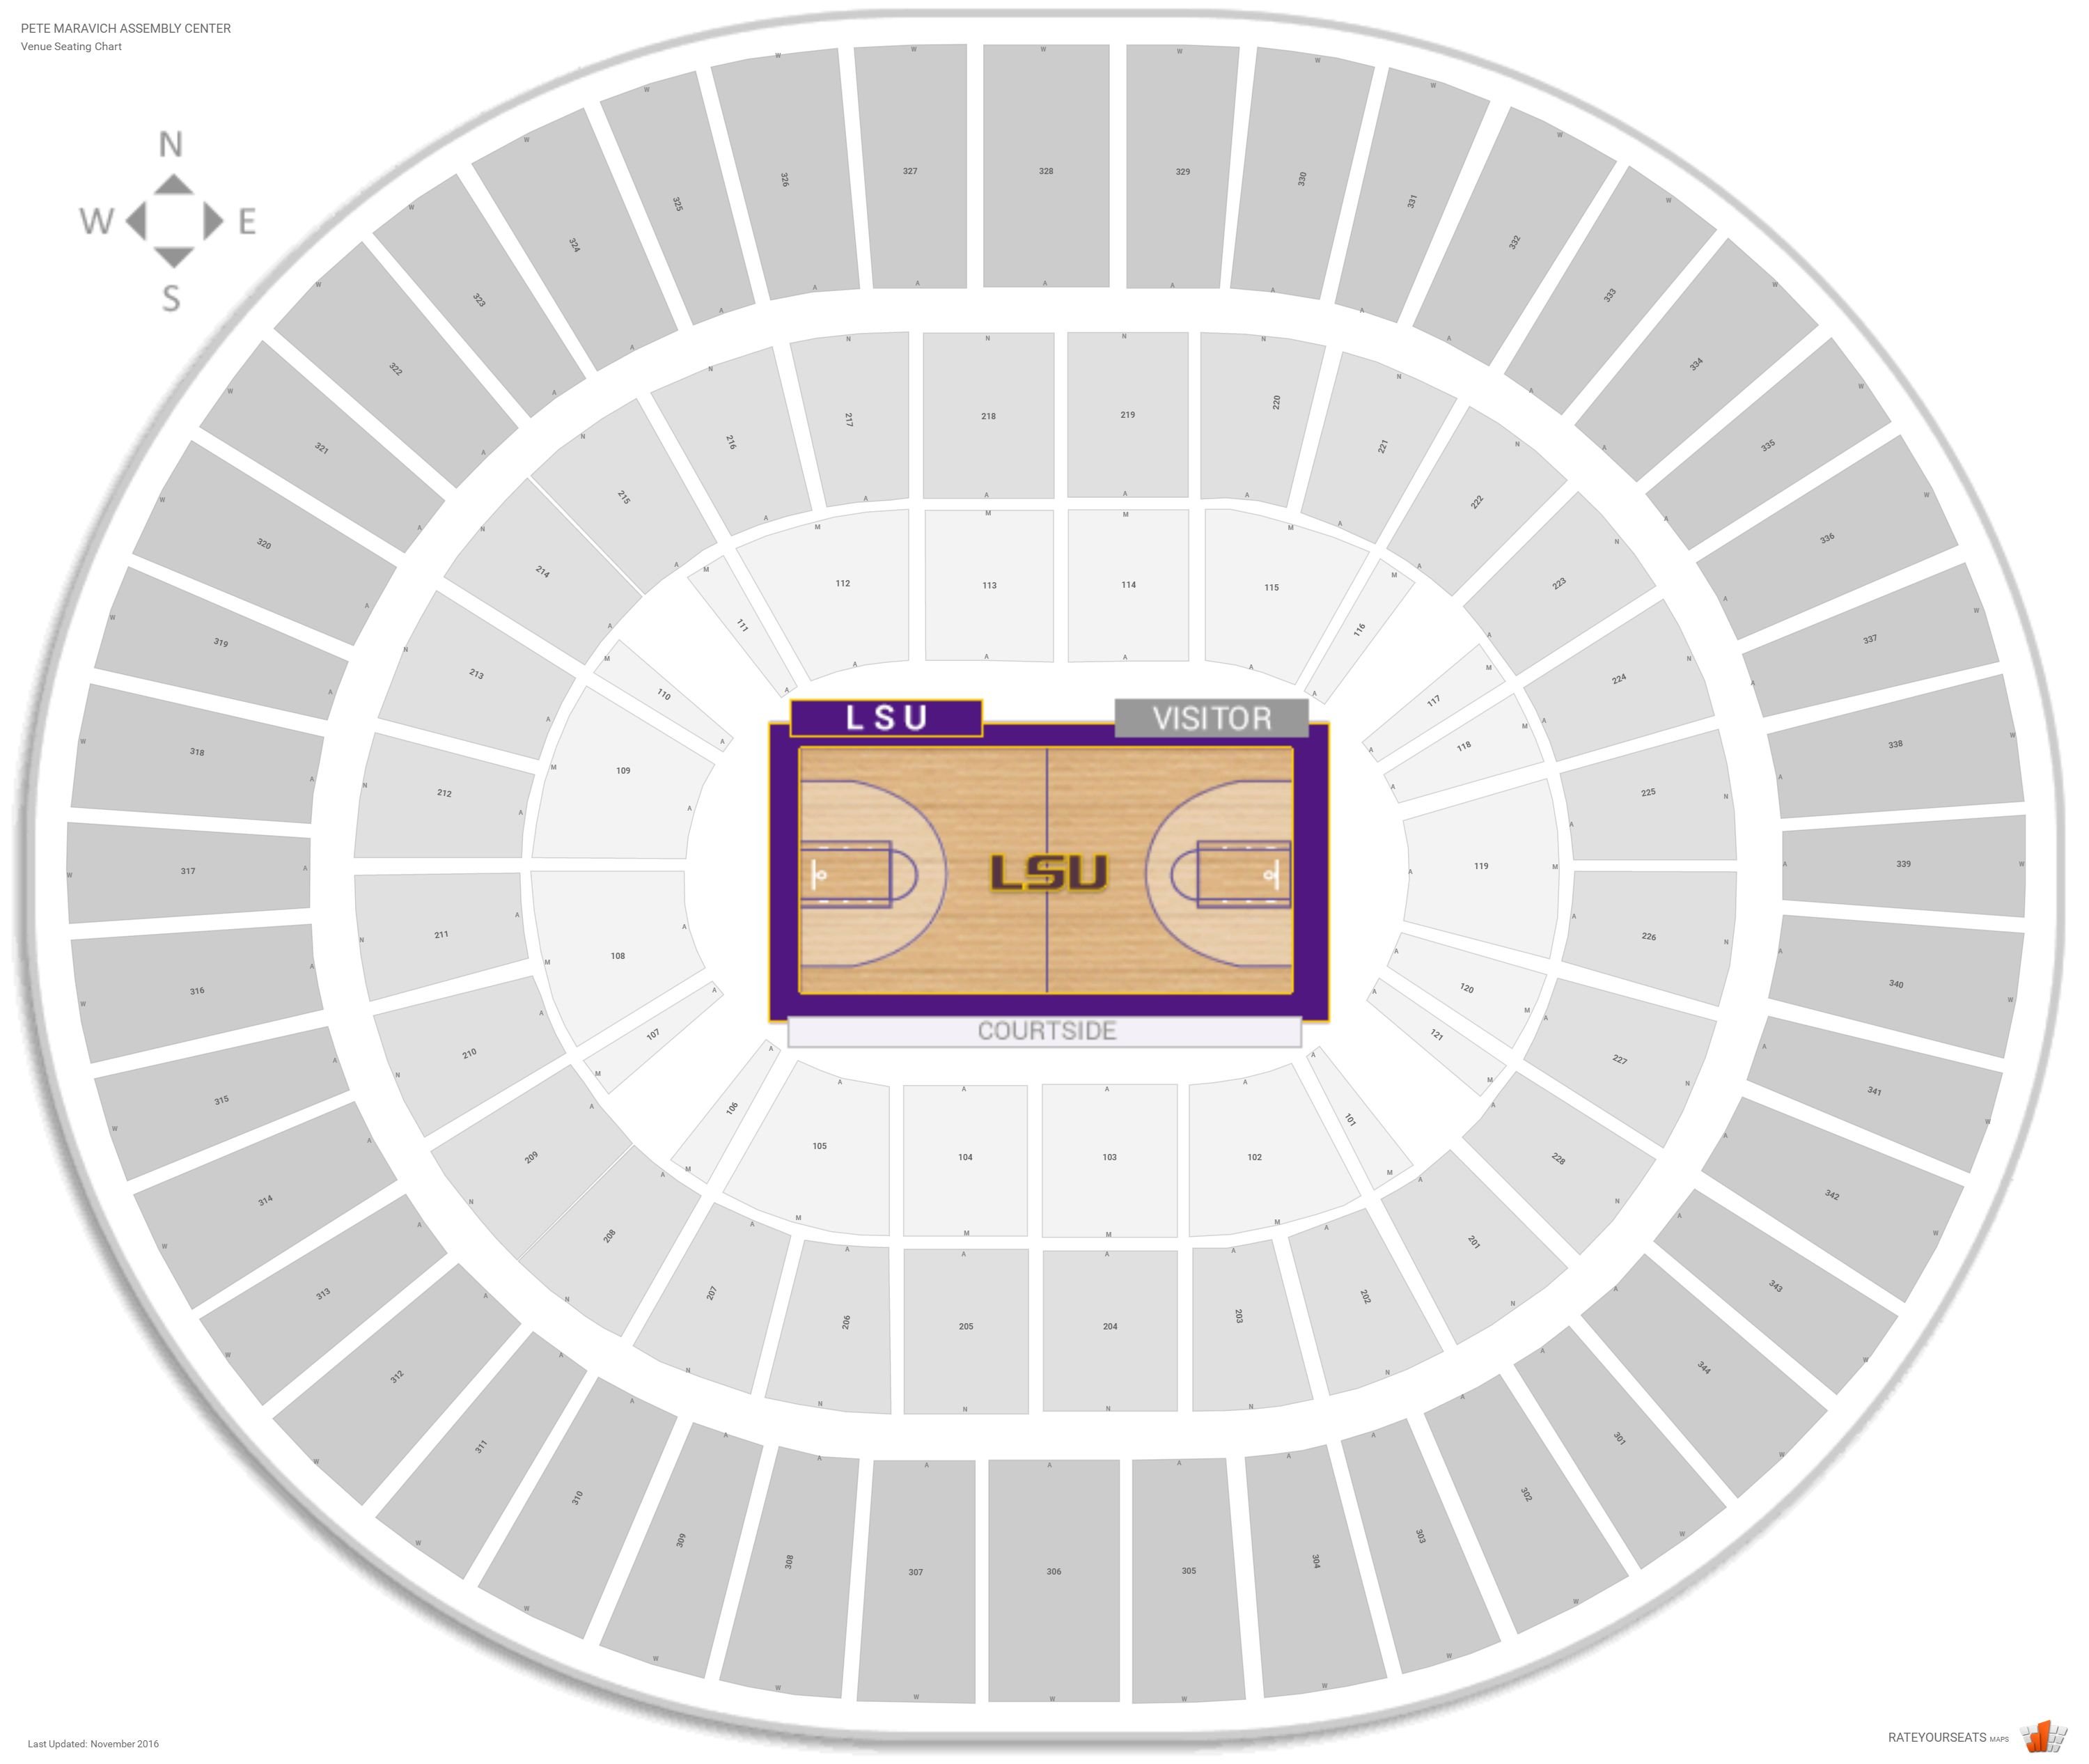 Pete Maravich Center Seating Chart